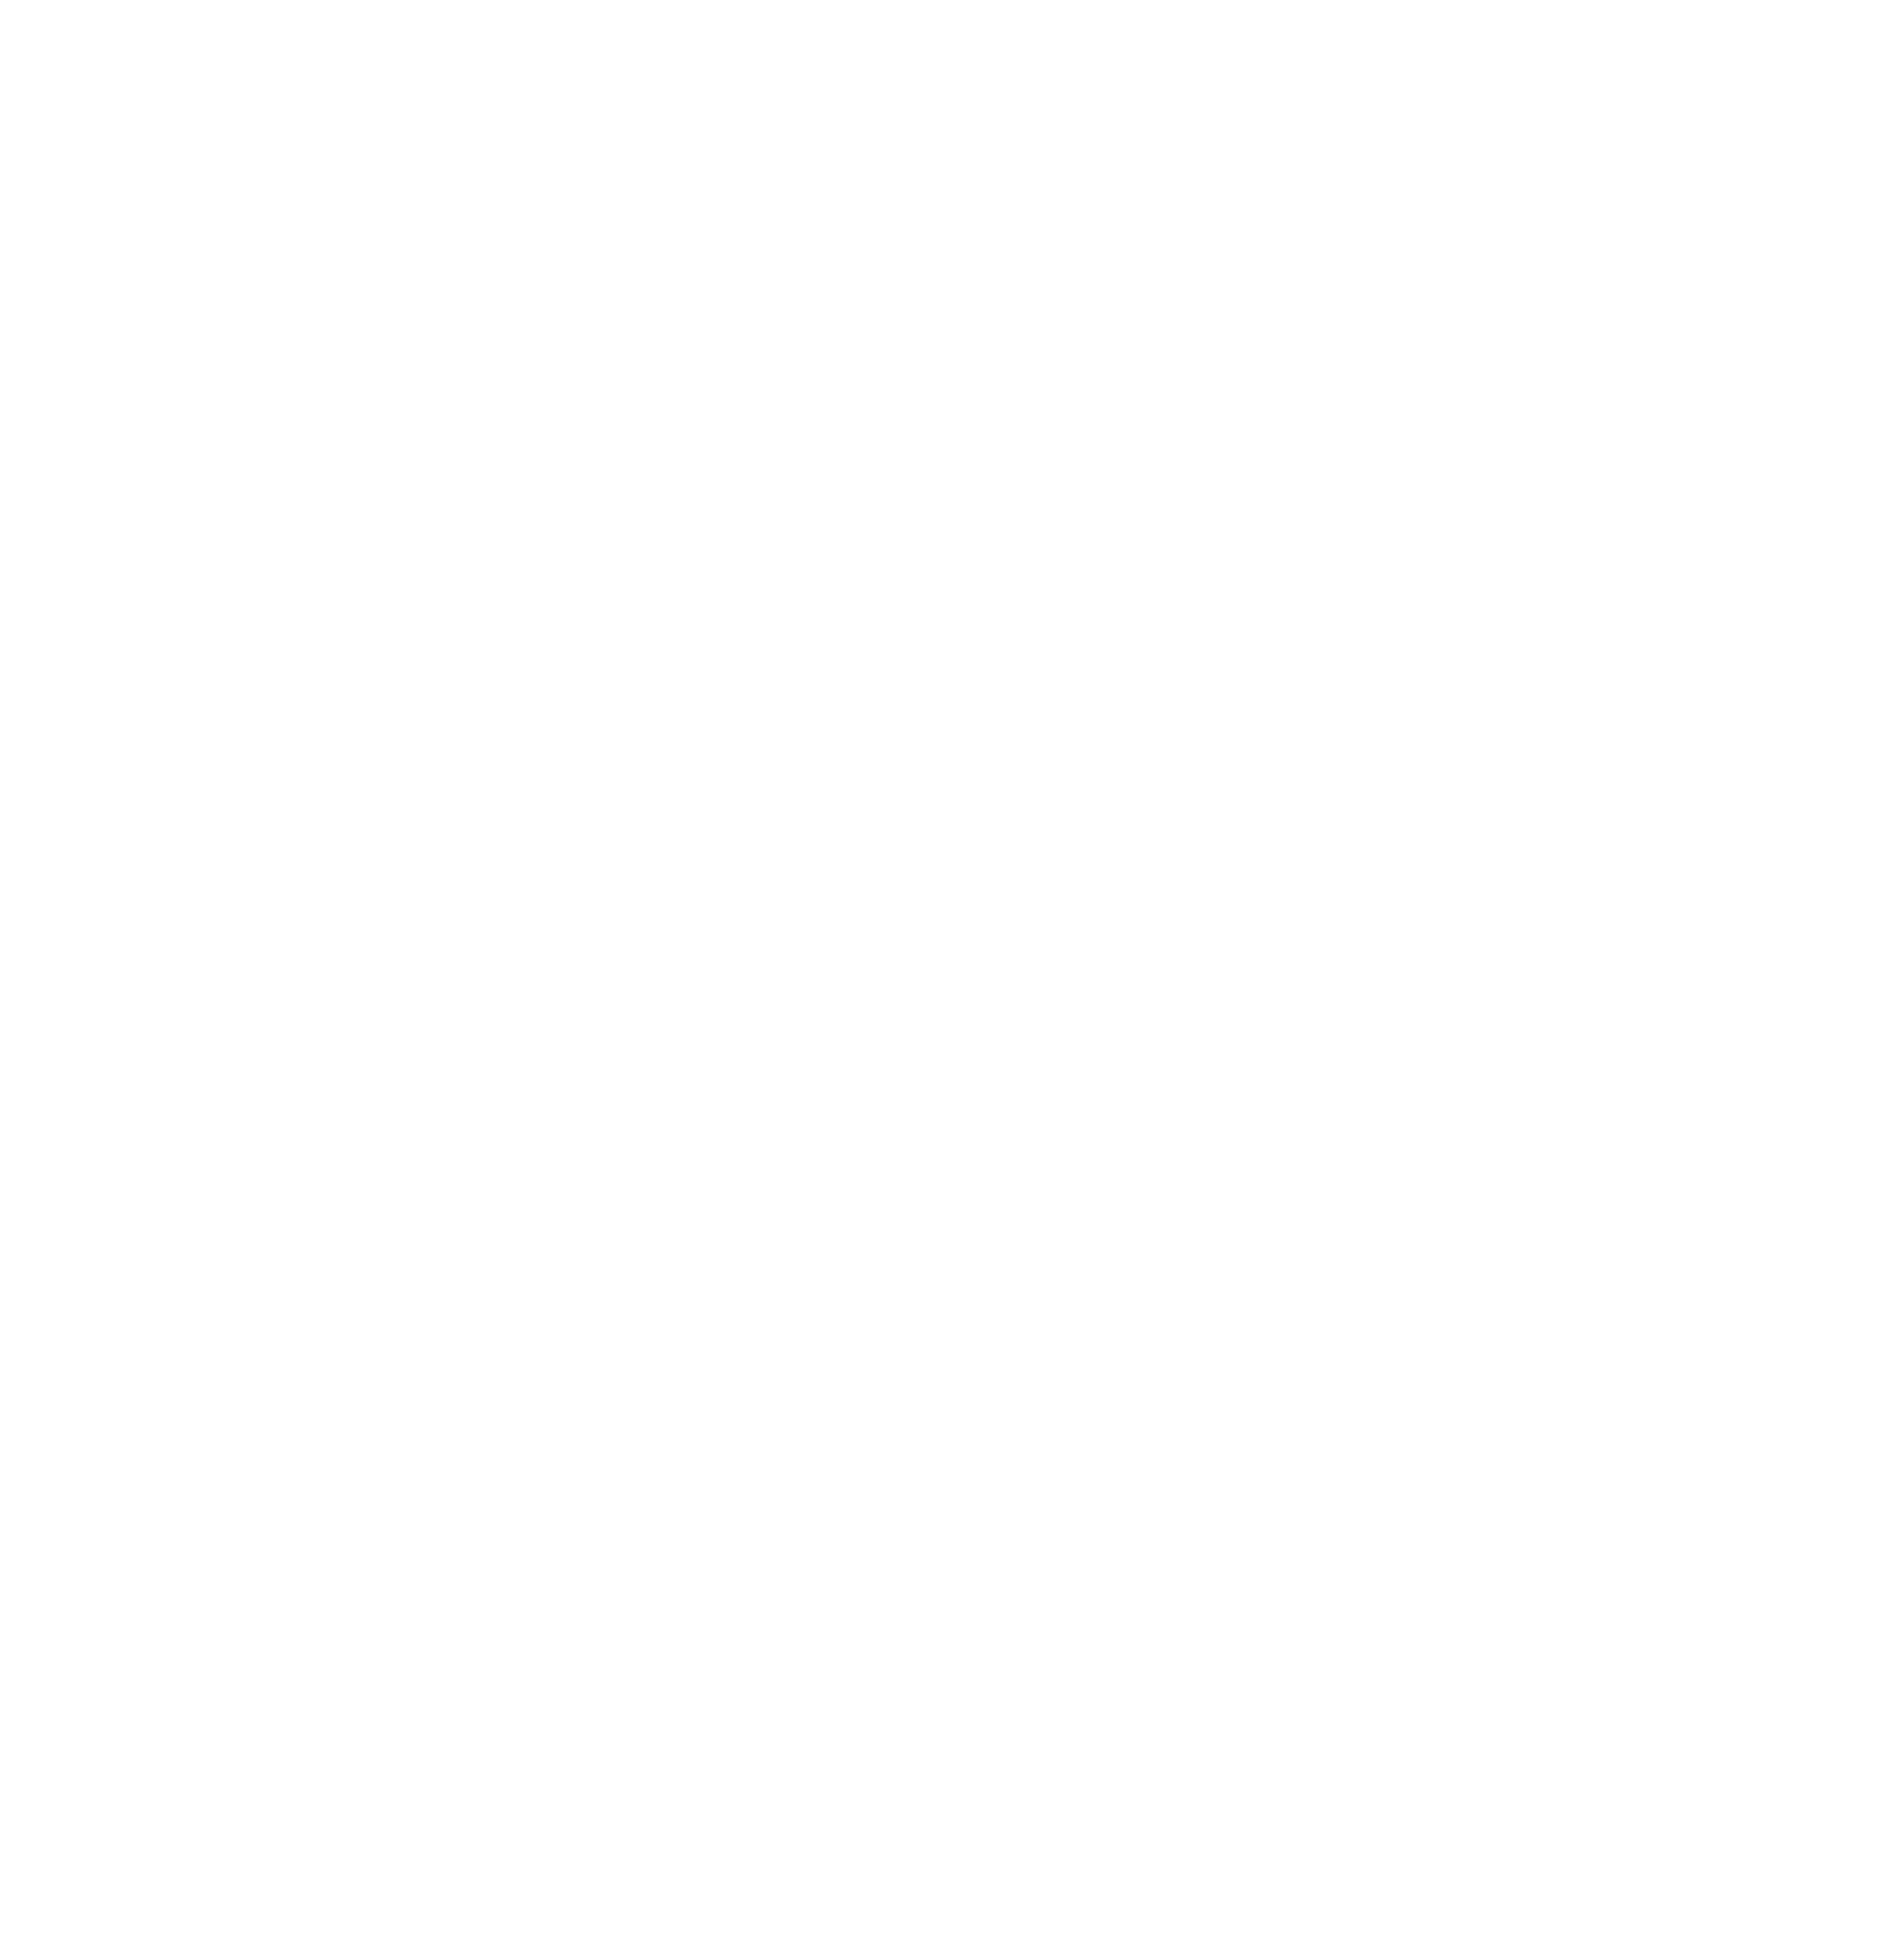 Academy of Musical Performance